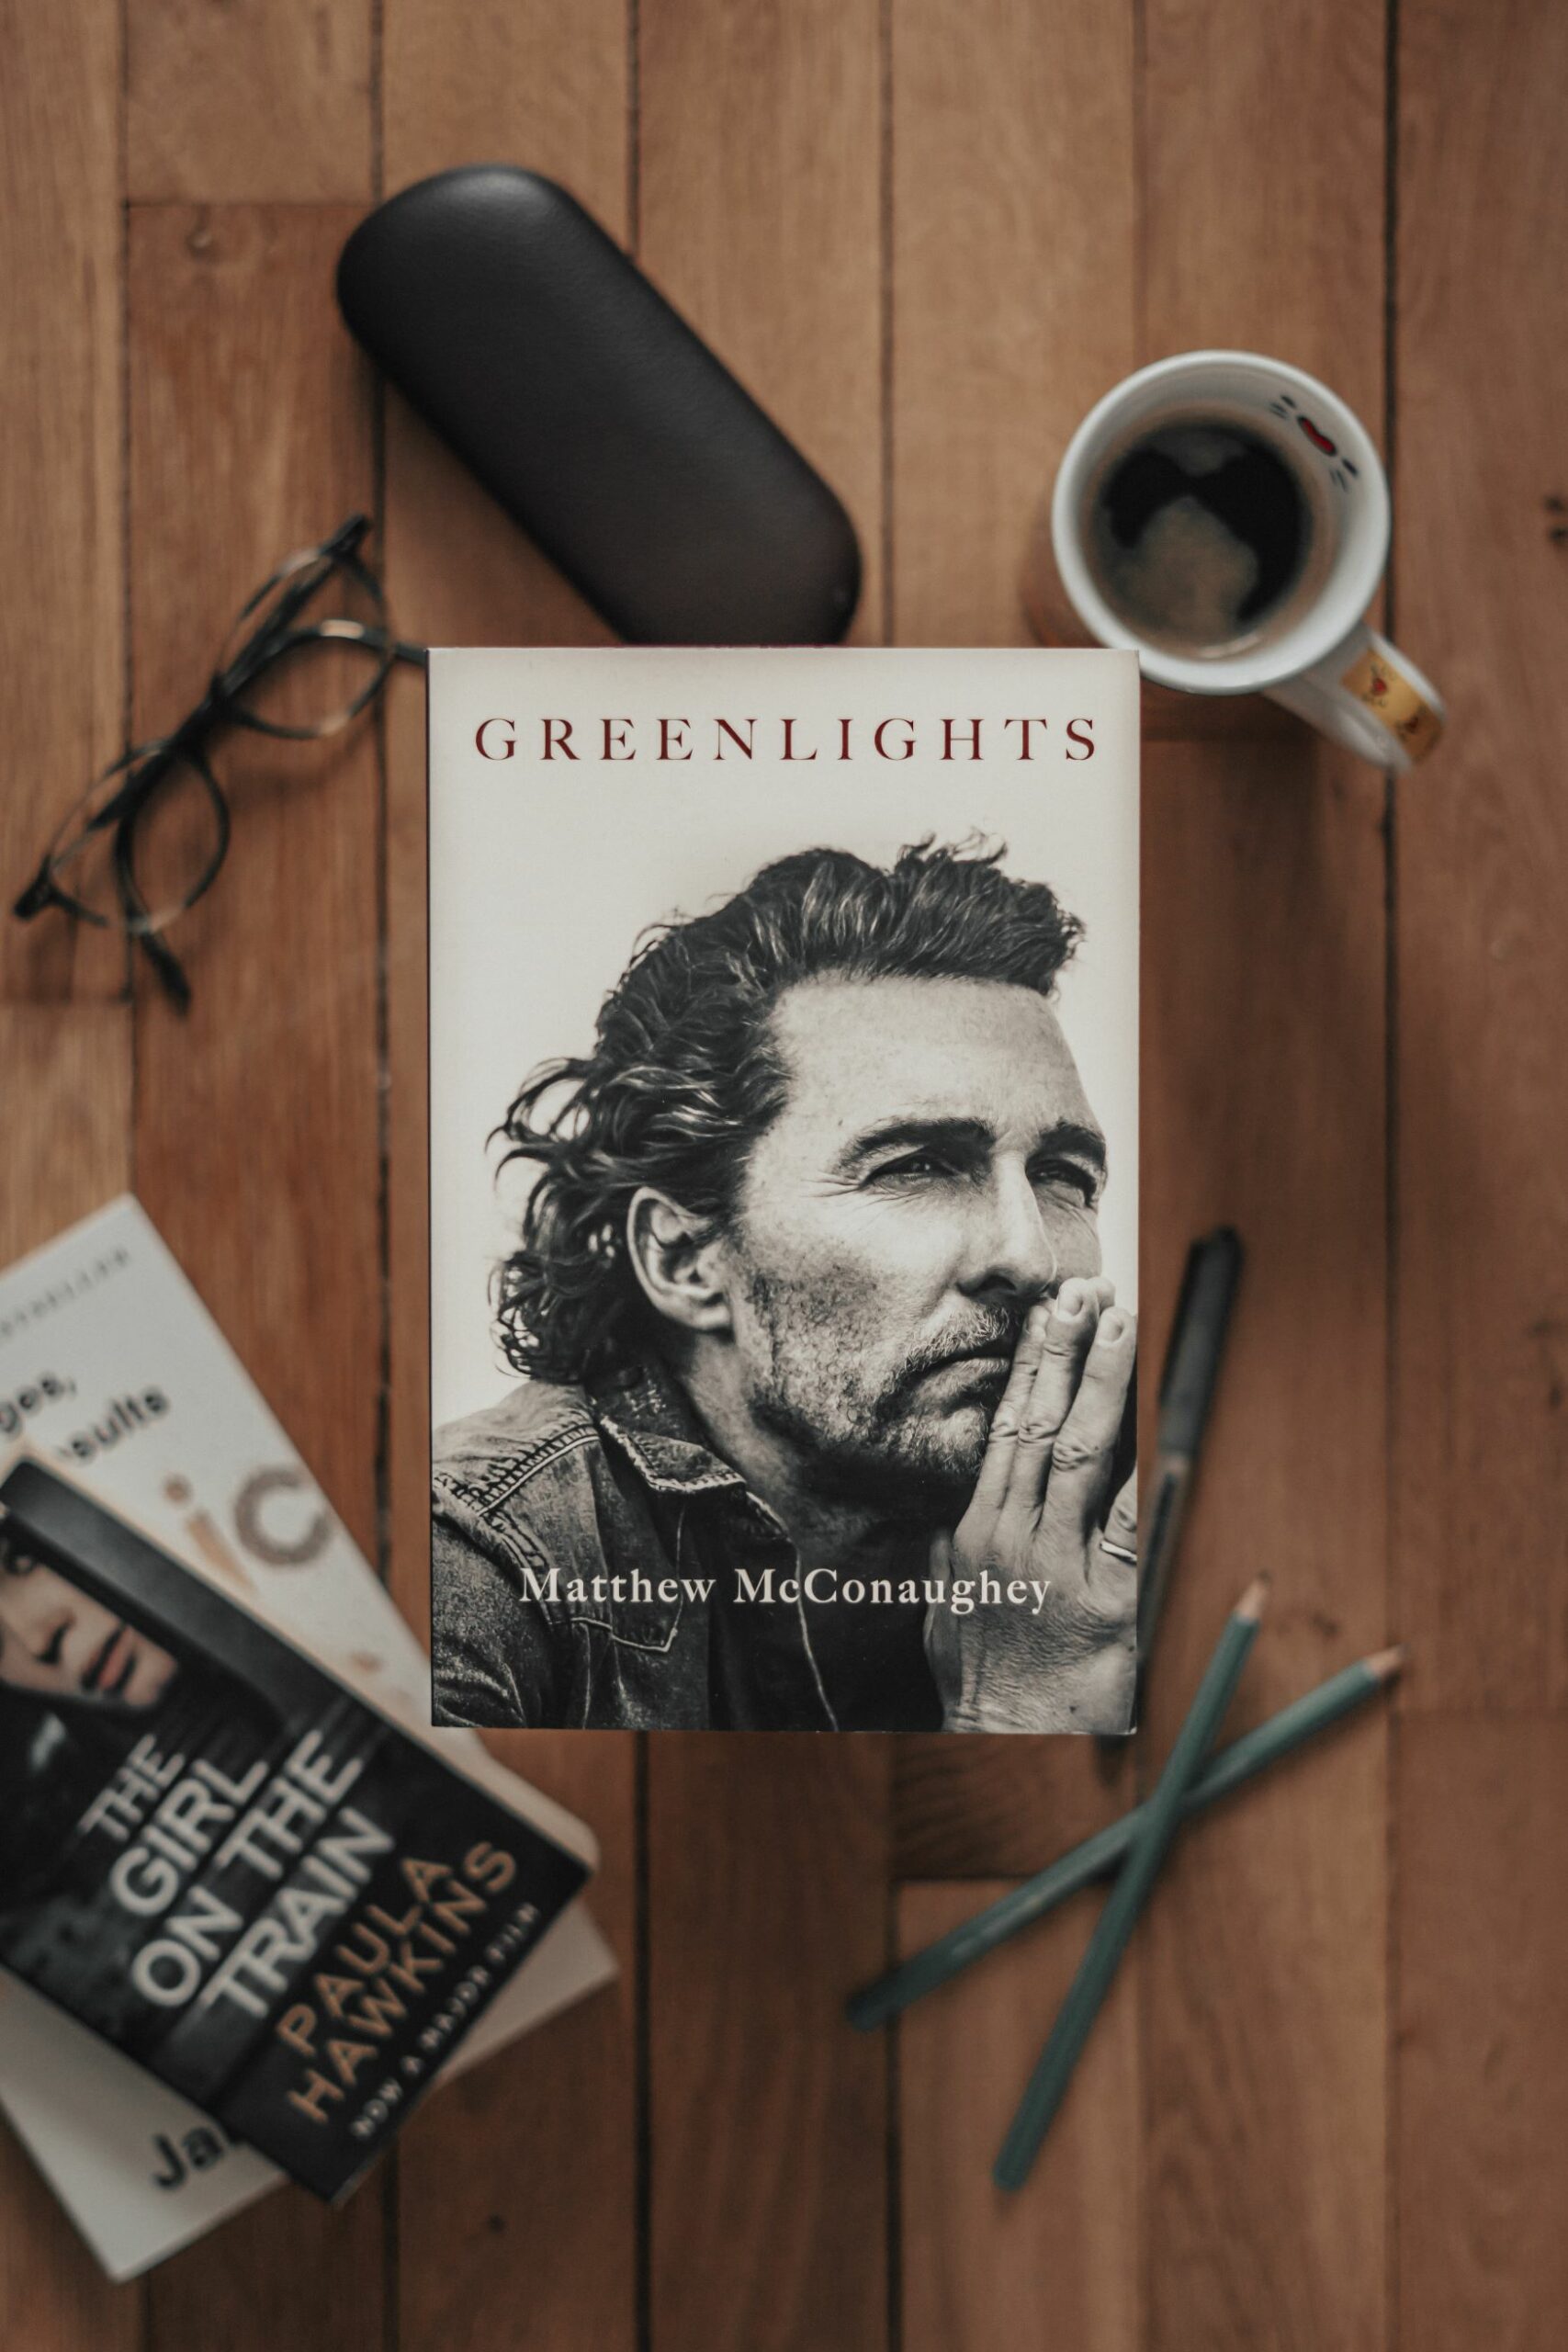 An image of a book with Matthew McConaughey on the cover. 